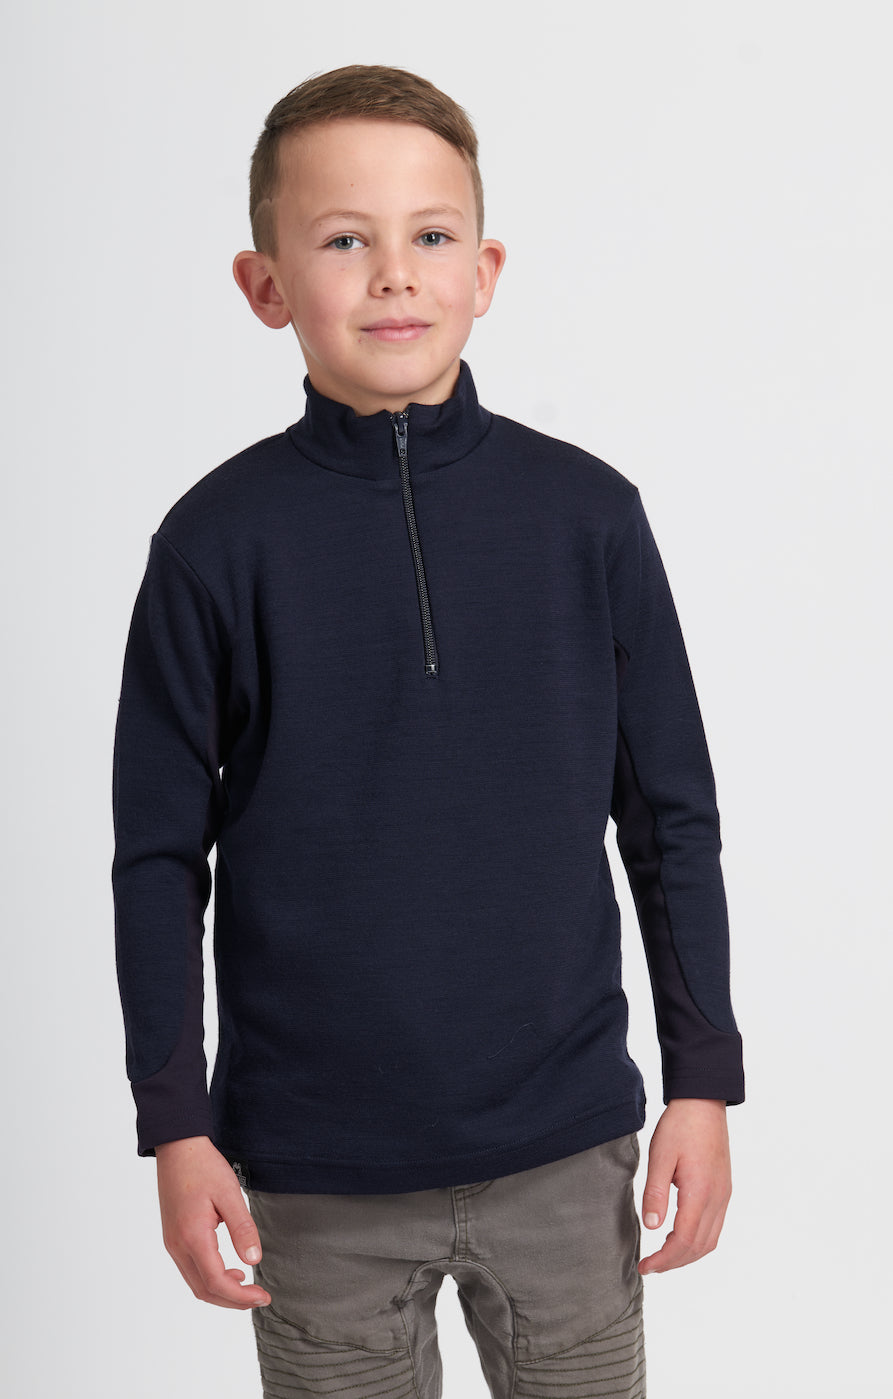 Kids Coast Quarter Zip - With Panel - Recommended for School